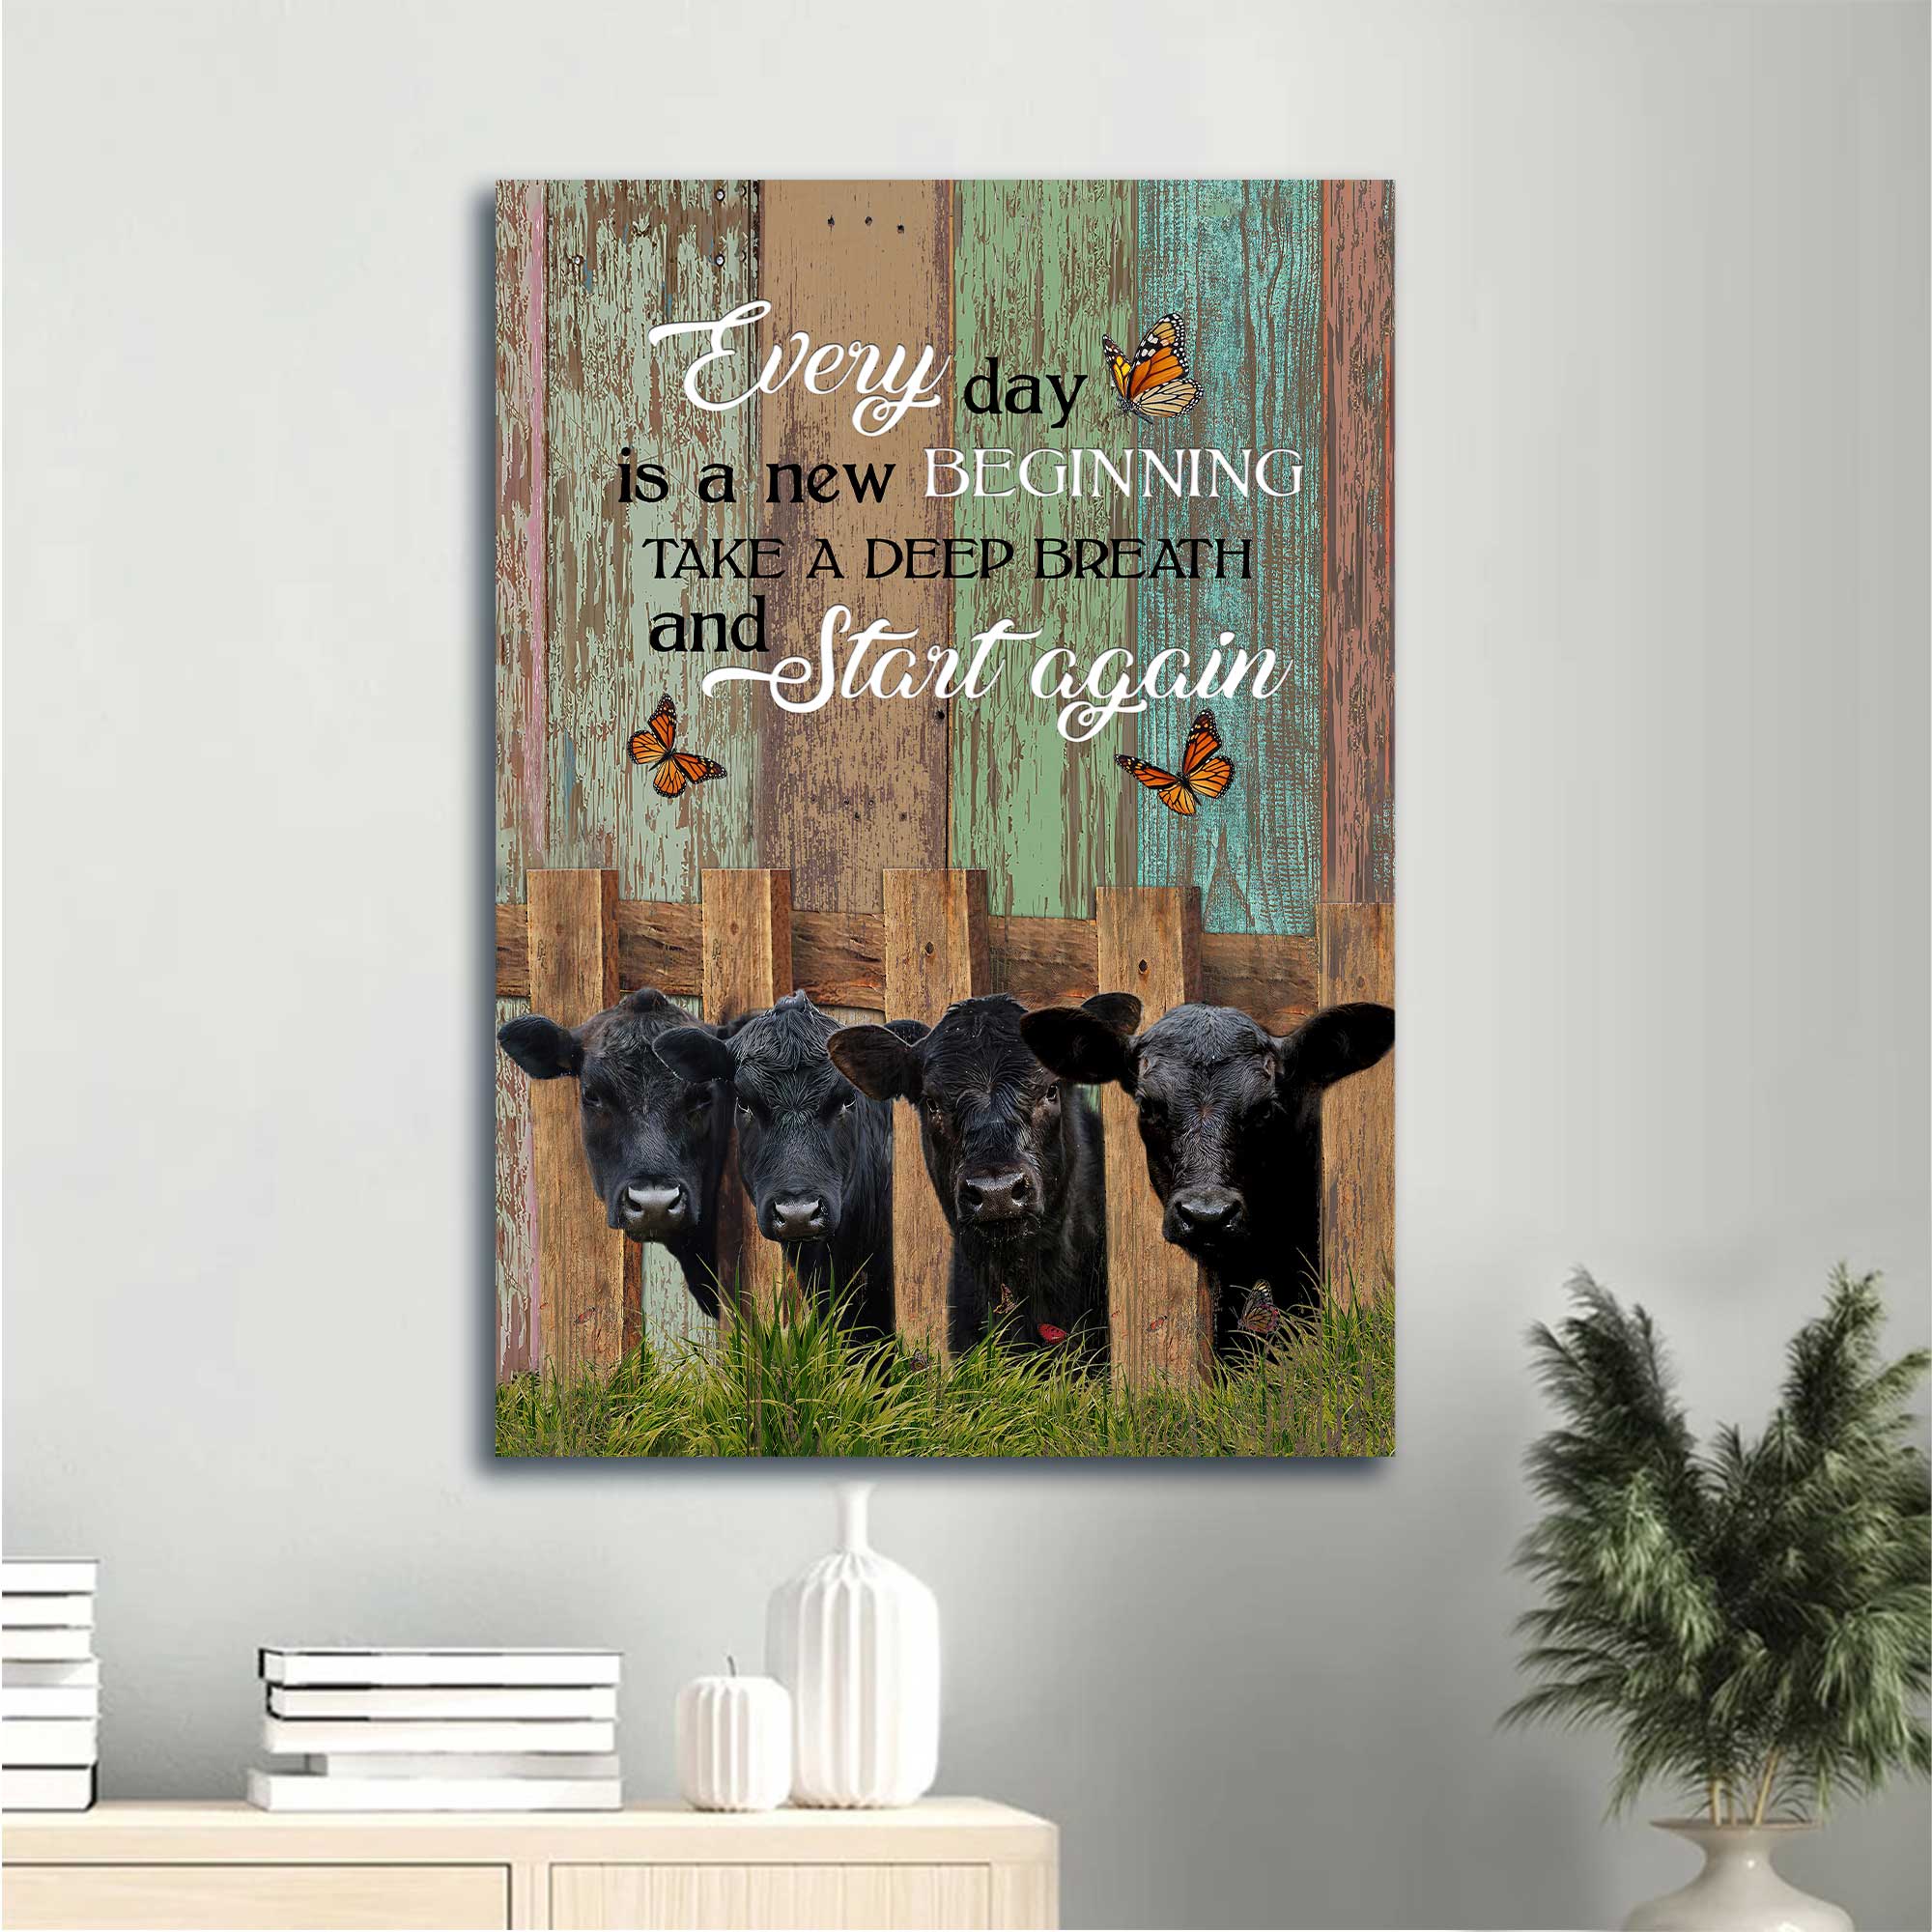 Jesus Portrait Canvas - Wooden Fence, Angus Cow, Orange Butterfly Canvas - Gift For Christian - Everyday Is A New Beginning Canvas